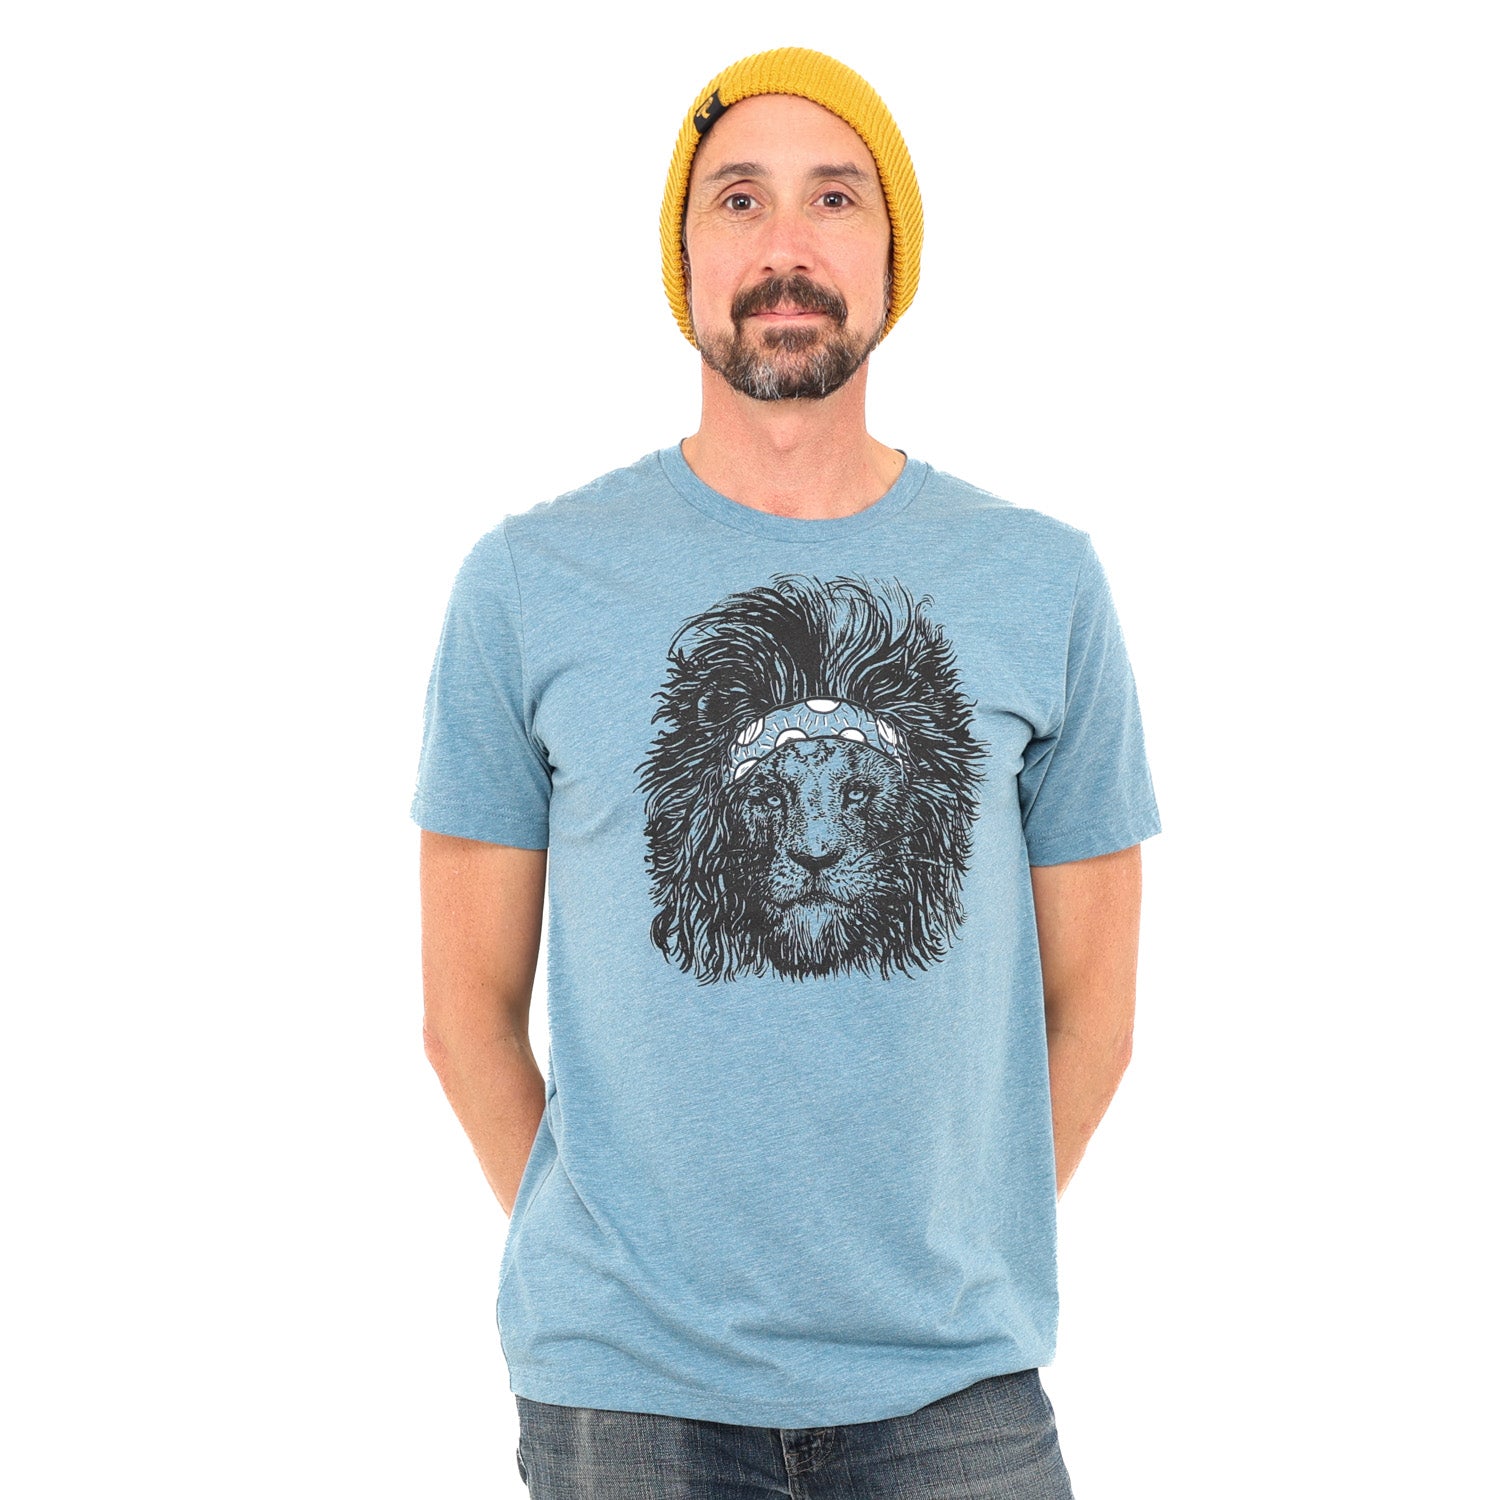 Man is wearing a steal blue tee with a screen printed lion wearing a headband on it.